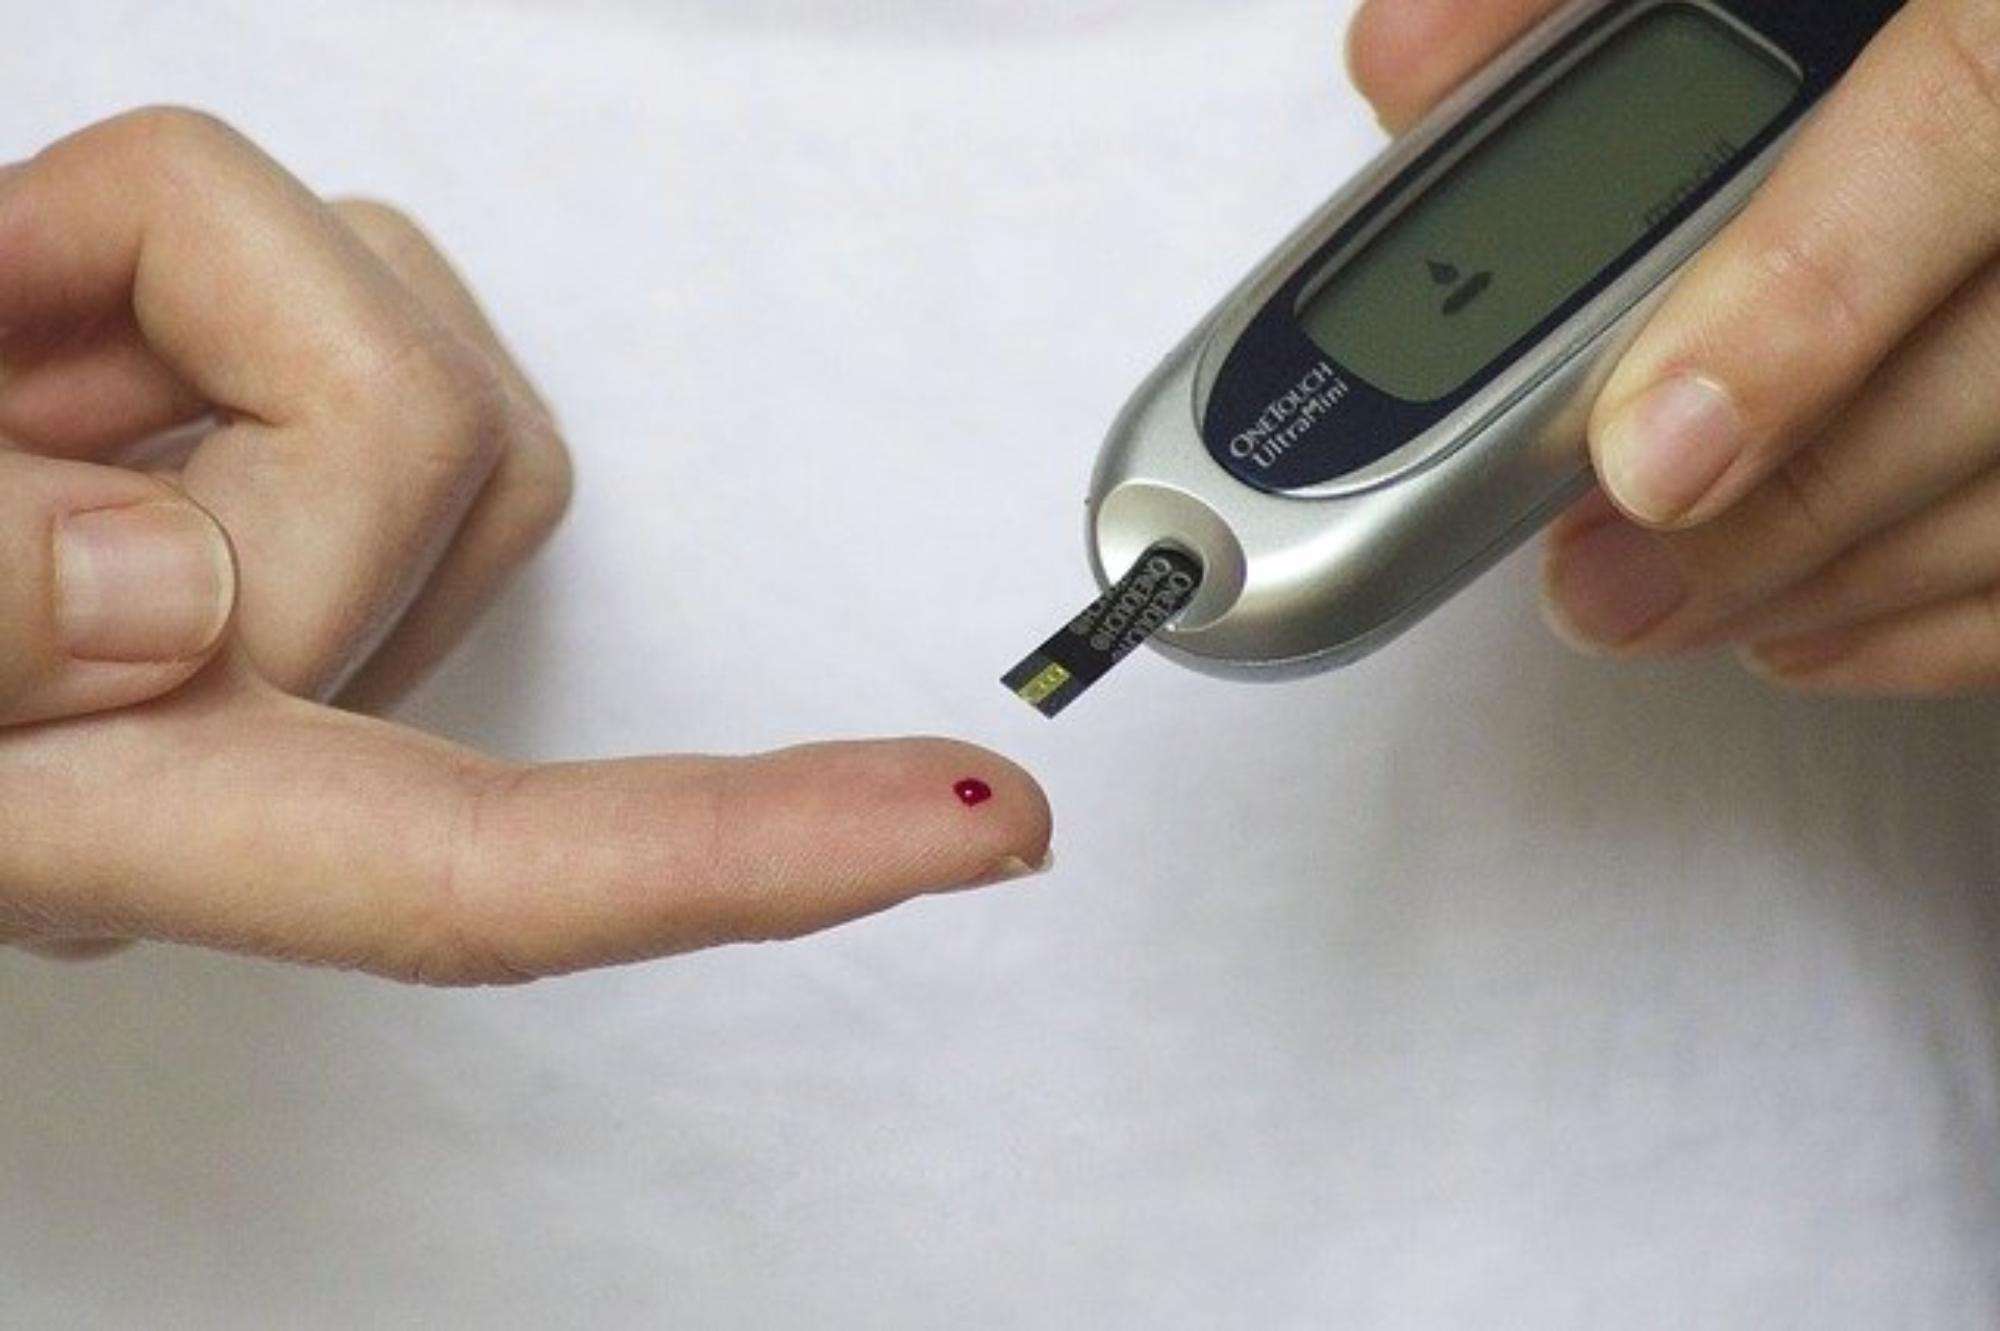 Diabetes requires awareness of blood sugar levels